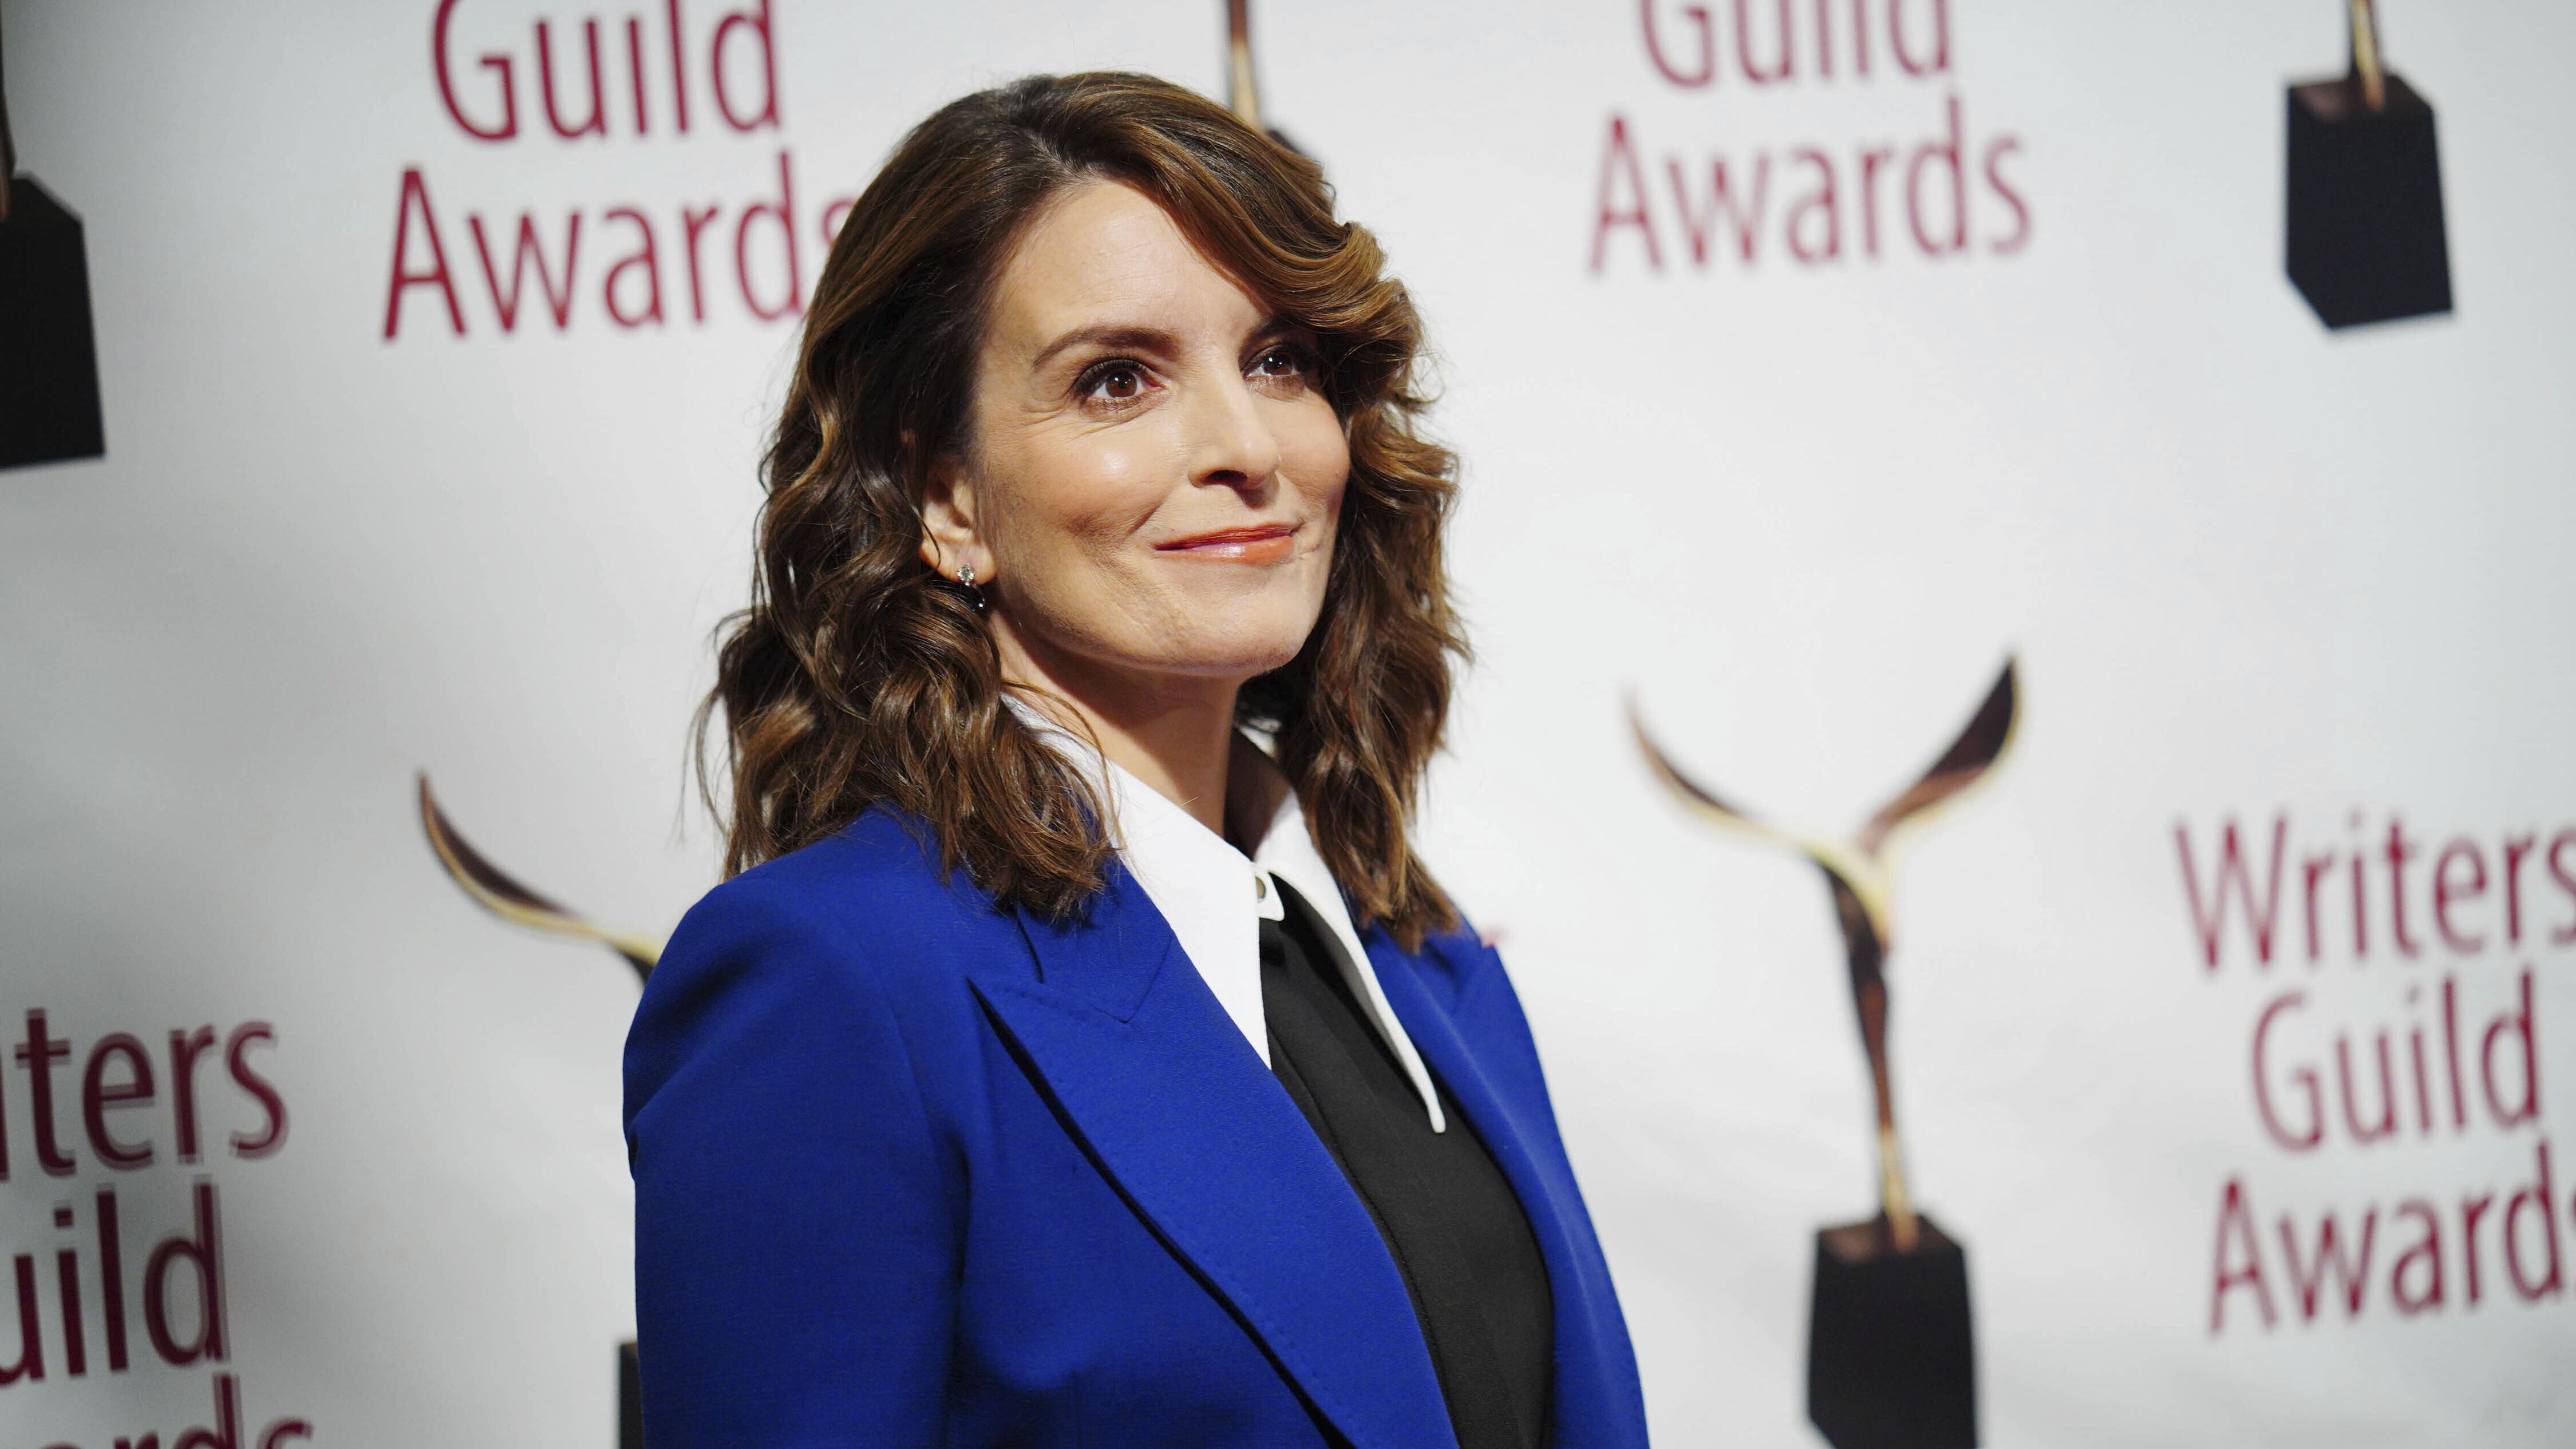 Tina Fey, creator and star of NBC's "30 Rock," has asked streaming services to pull episodes that featured White actors in blackface.